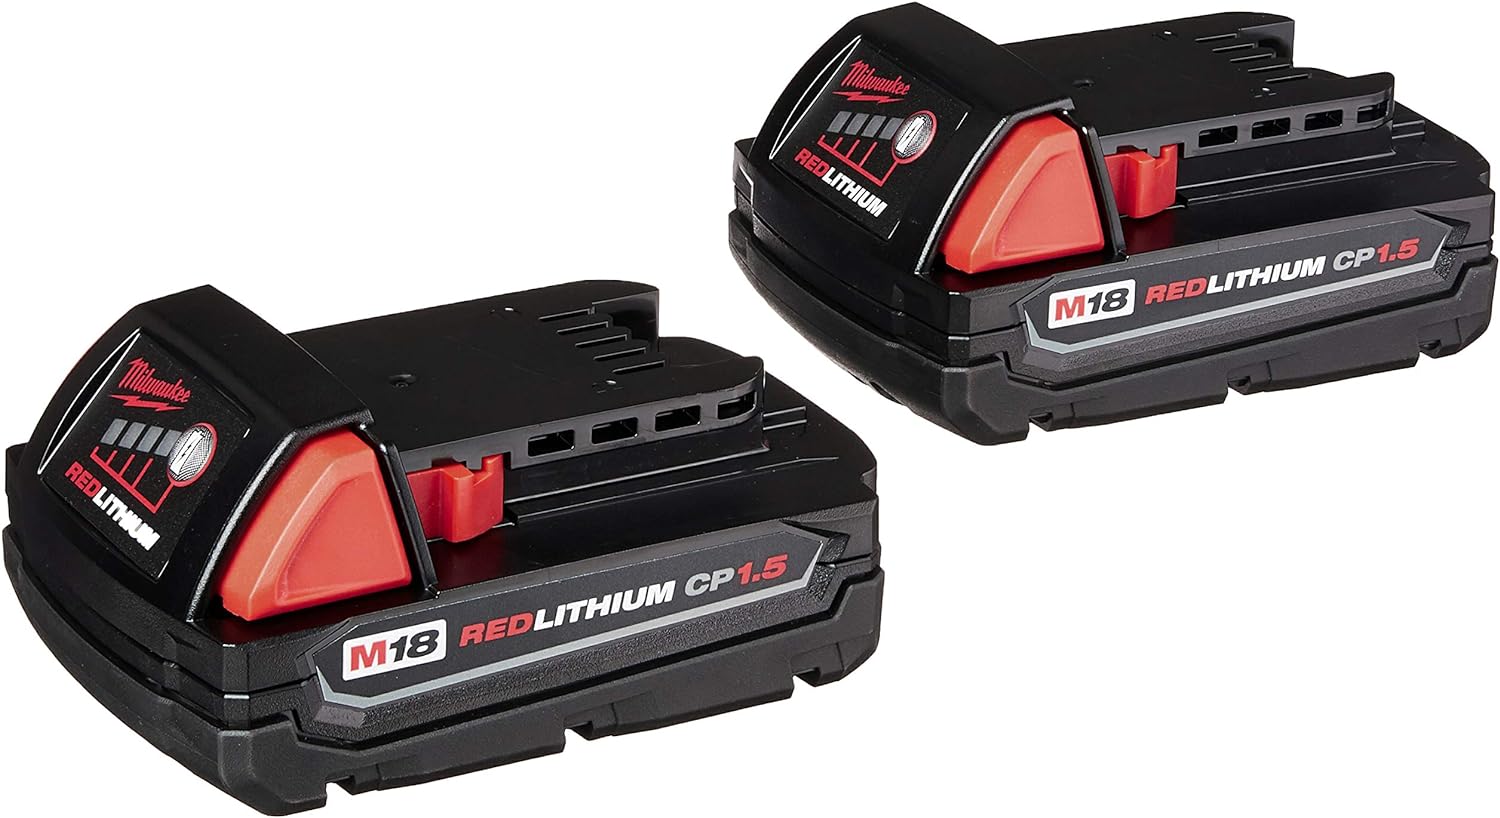 Milwaukee 2697-22Ct M18 18-Volt Lithium-Ion Cordless Hammer Drill/Impact Driver Combo Kit